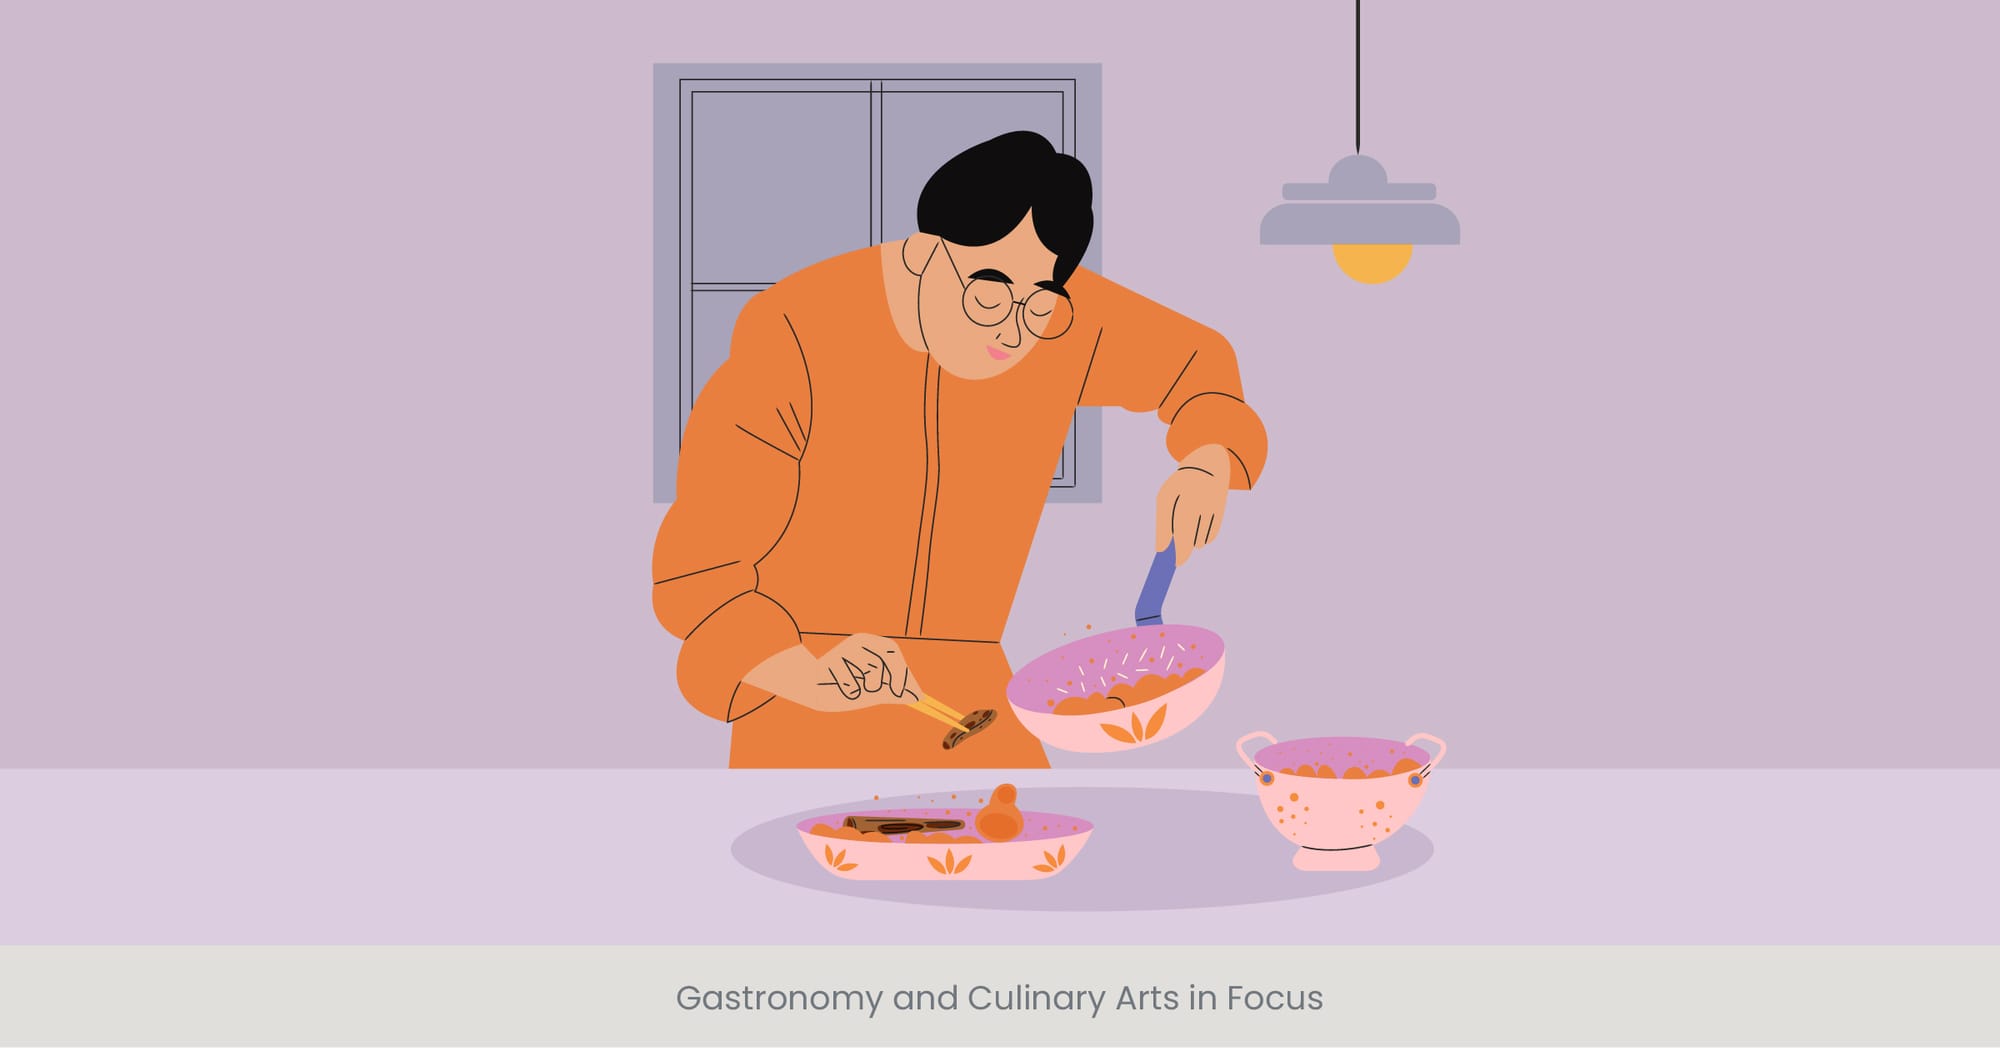 Gastronomy and Culinary Arts in Focus